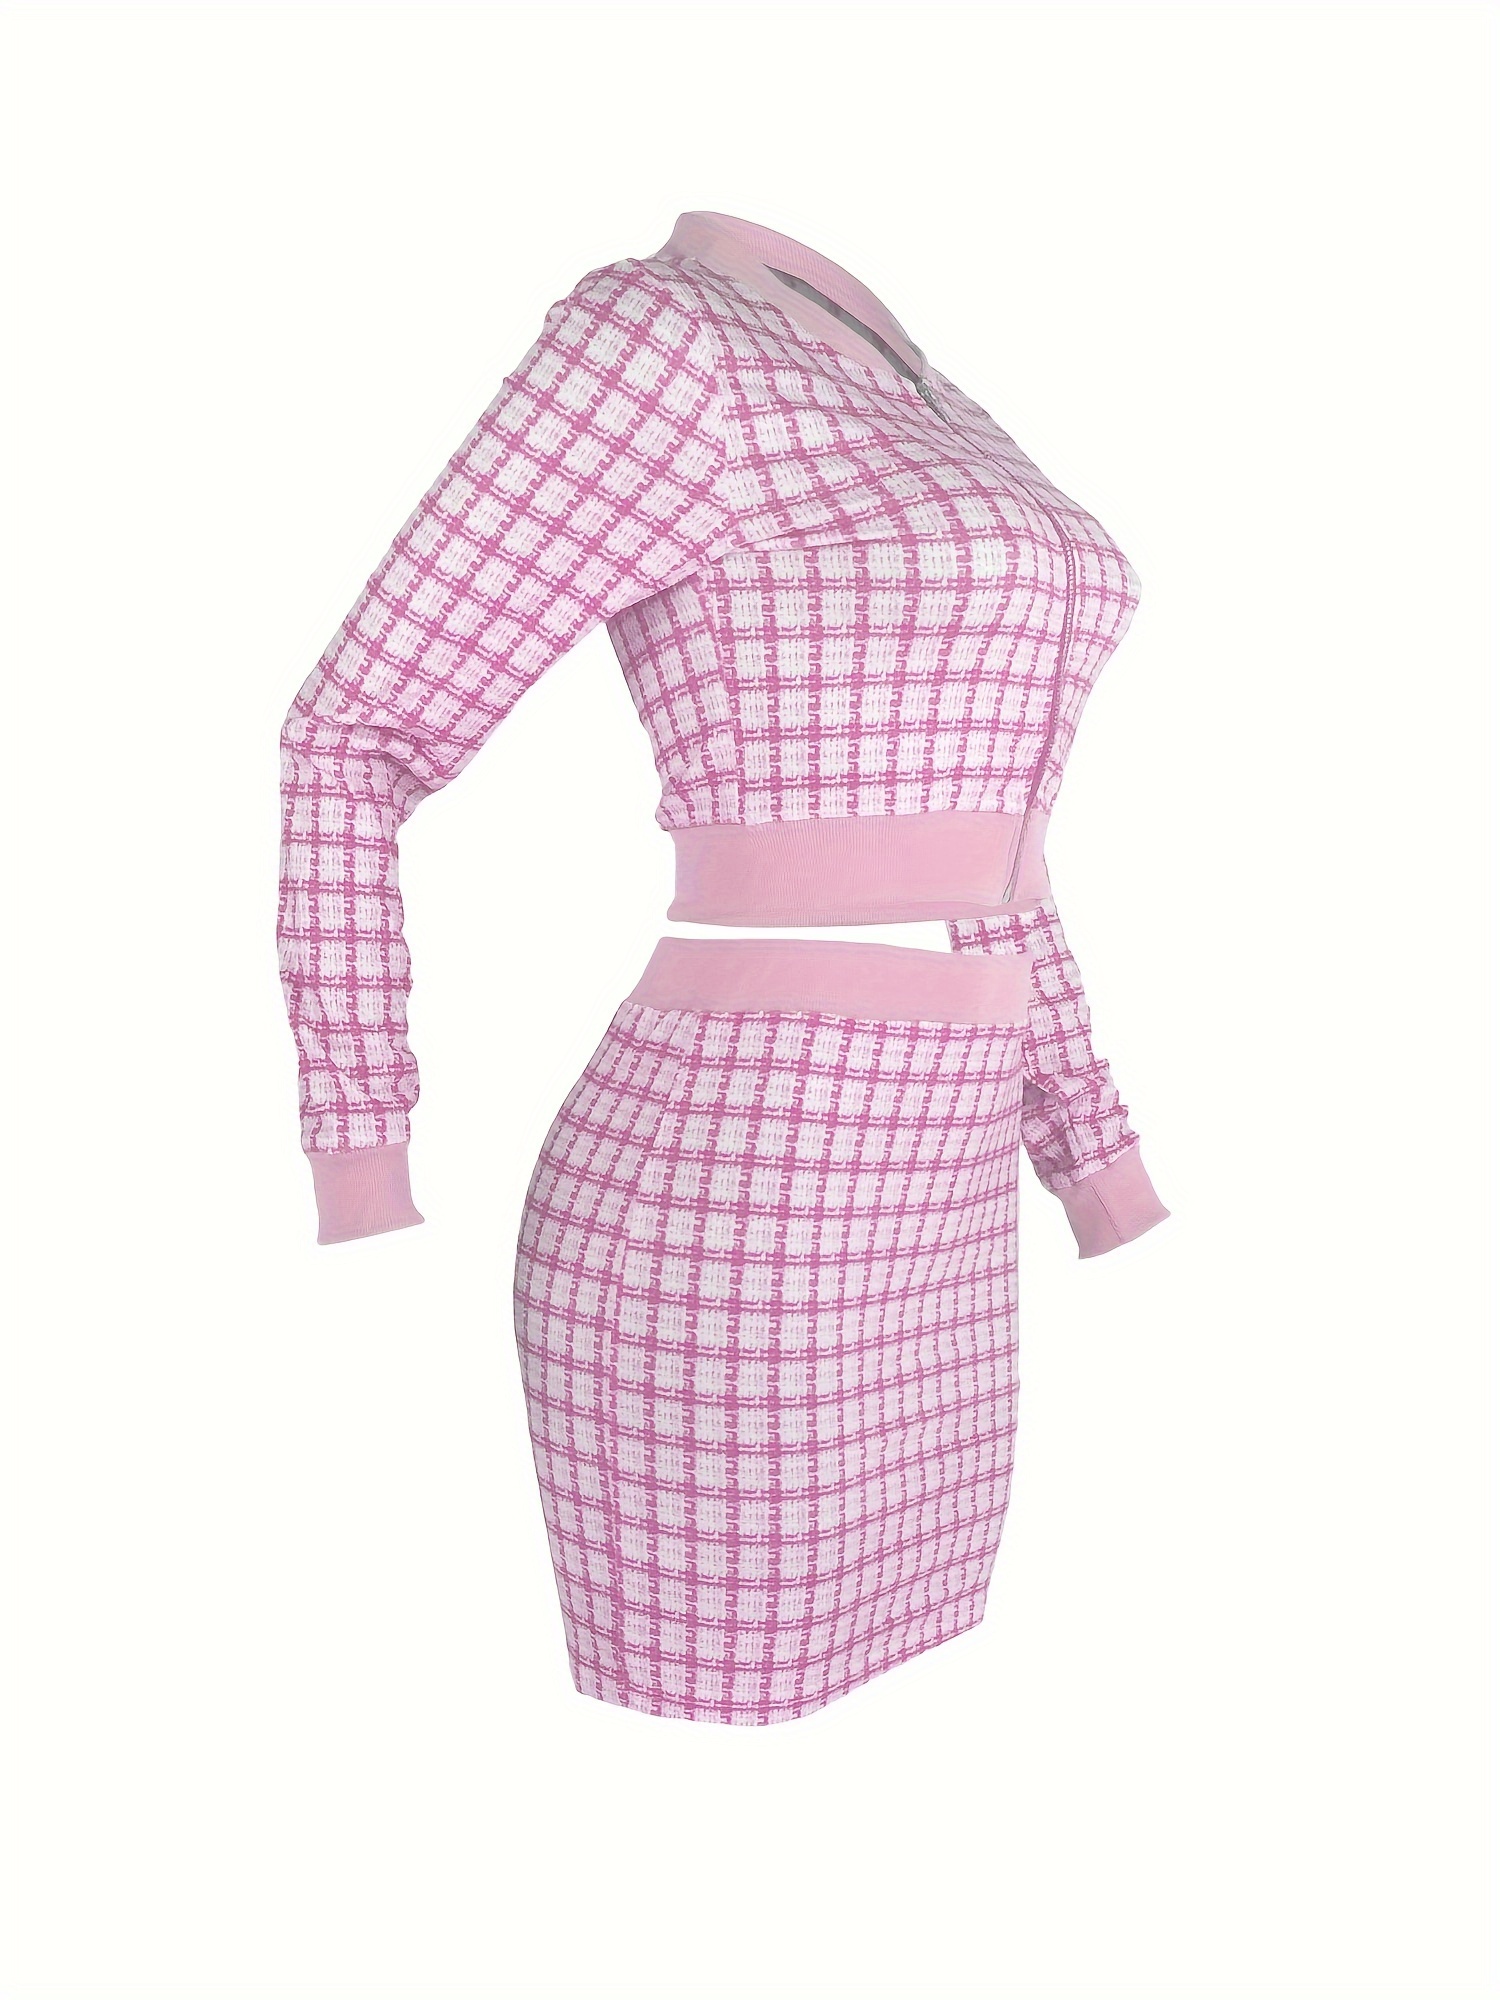 elegant plaid matching two piece set crop zip up jacket bodycon skirt outfits womens clothing details 49